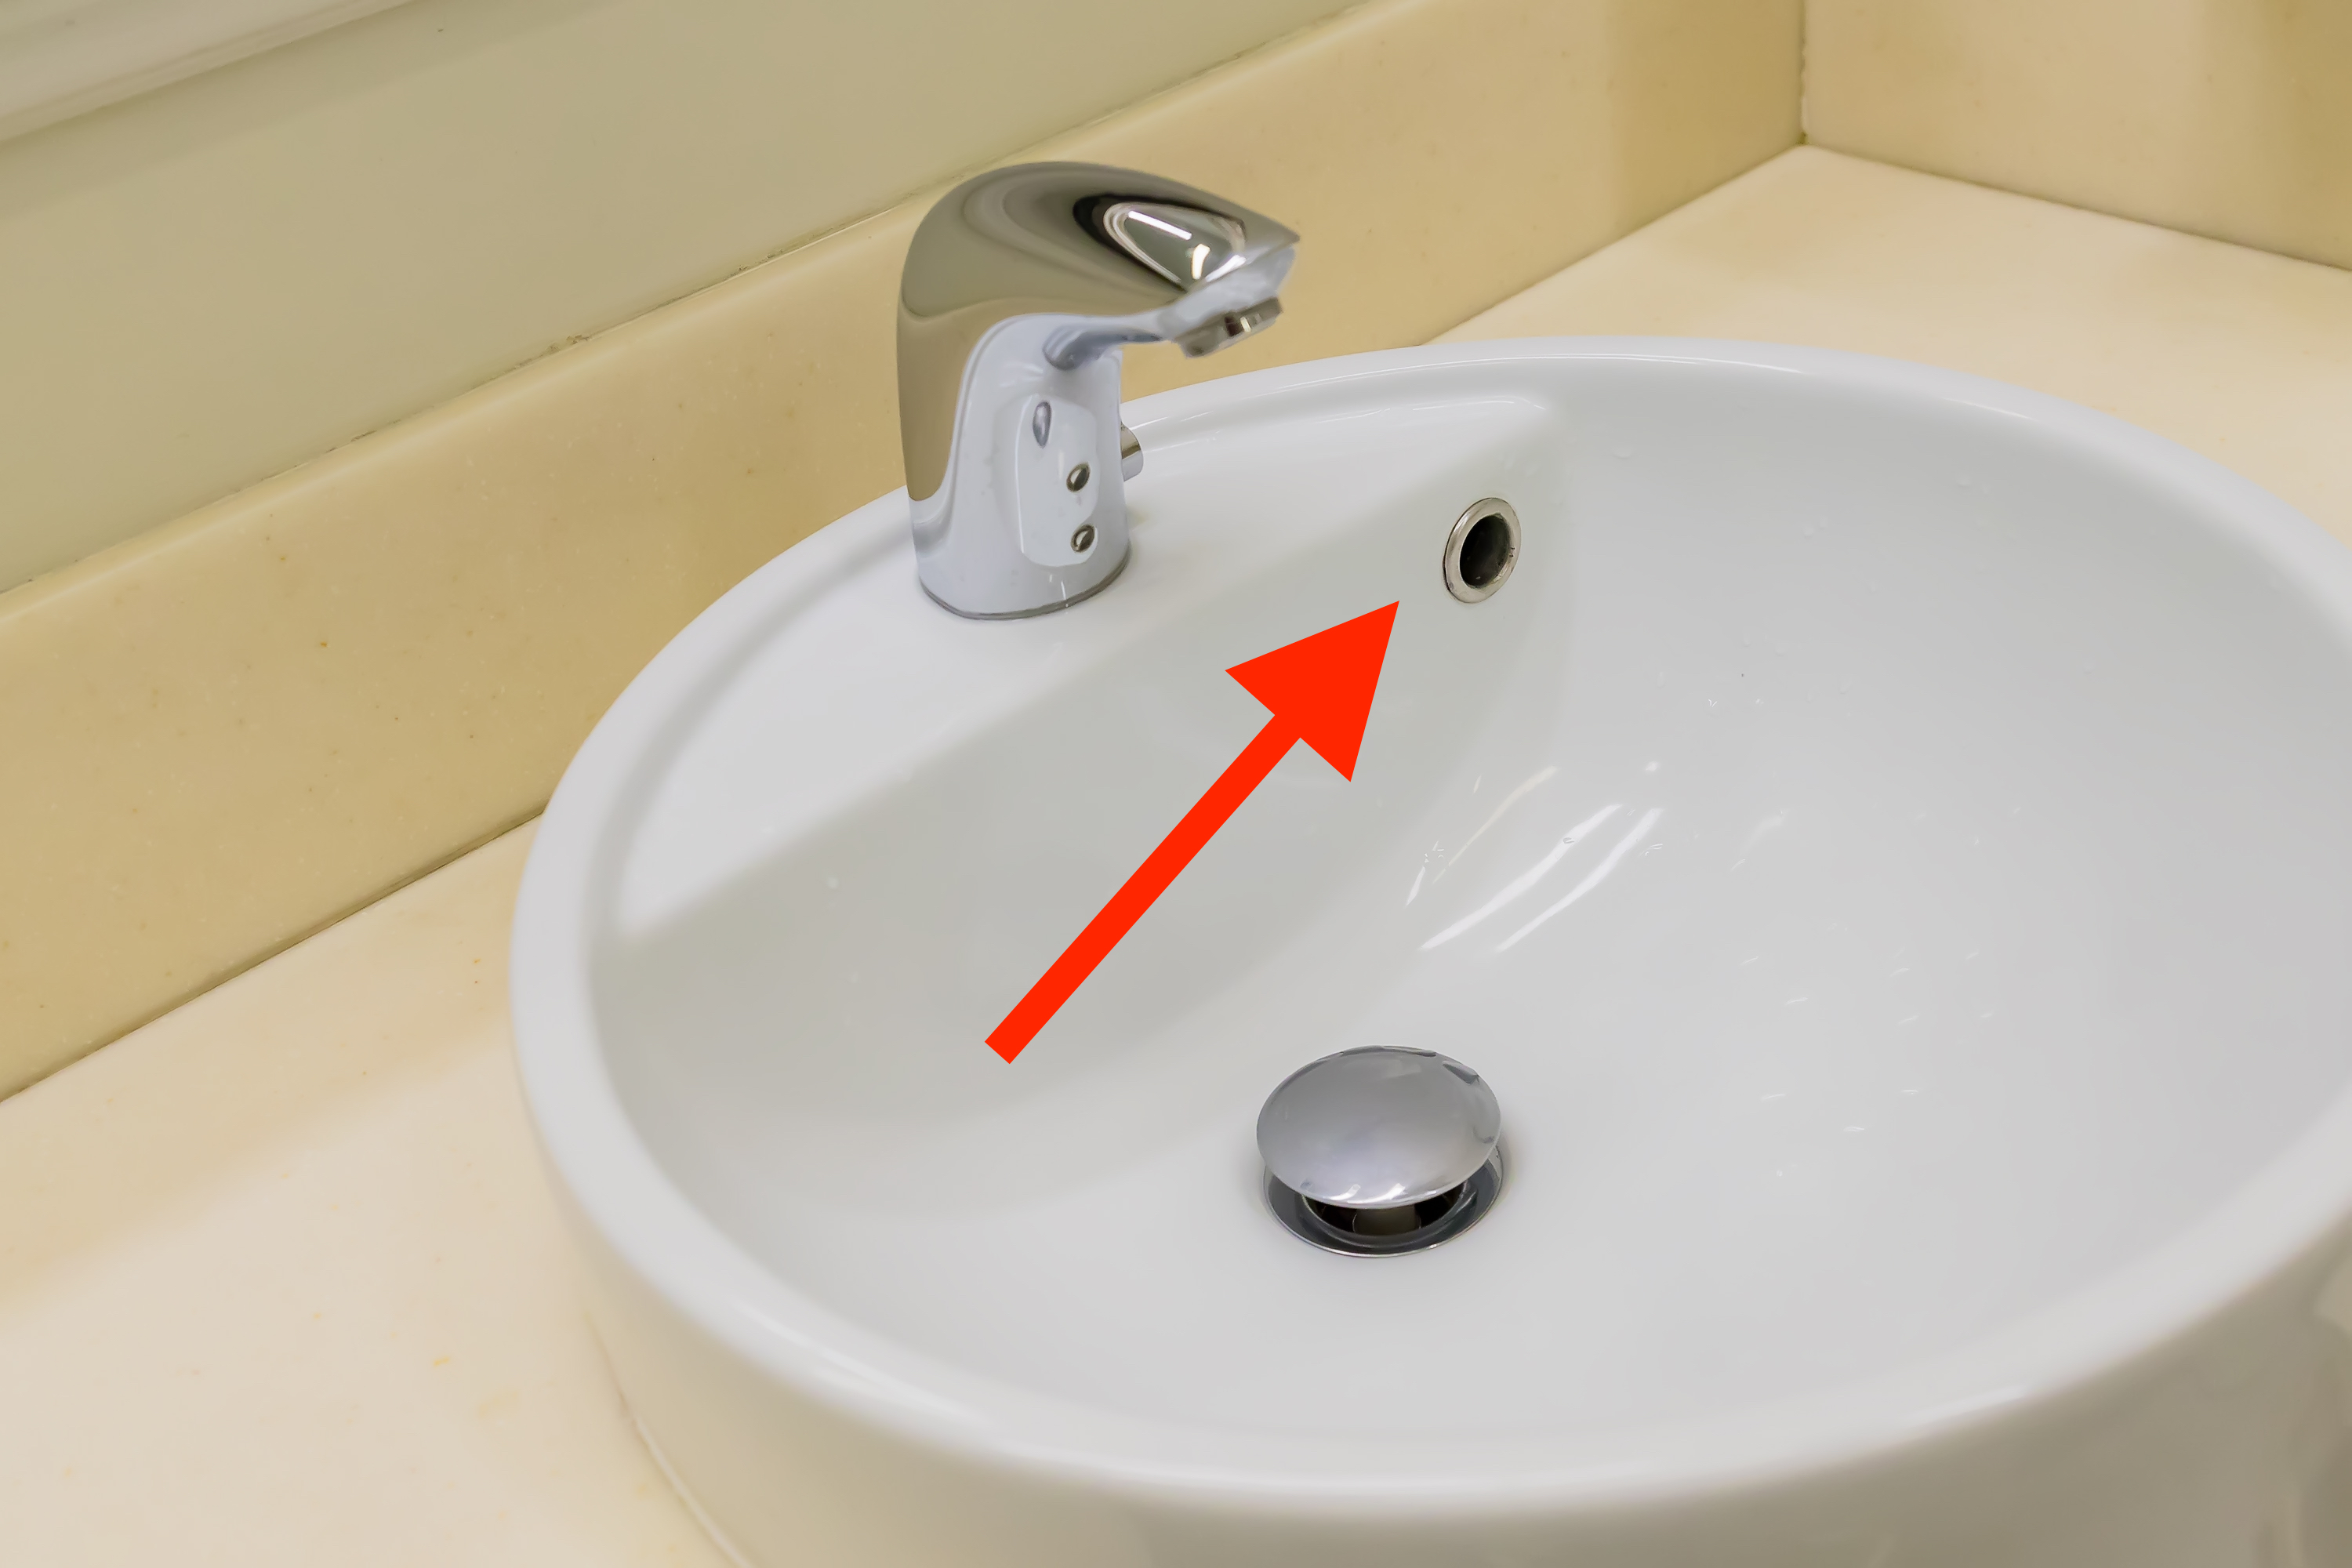 Ever Wondered What Is The Purpose Of This Hole On Side Of Your Sink Now You Know